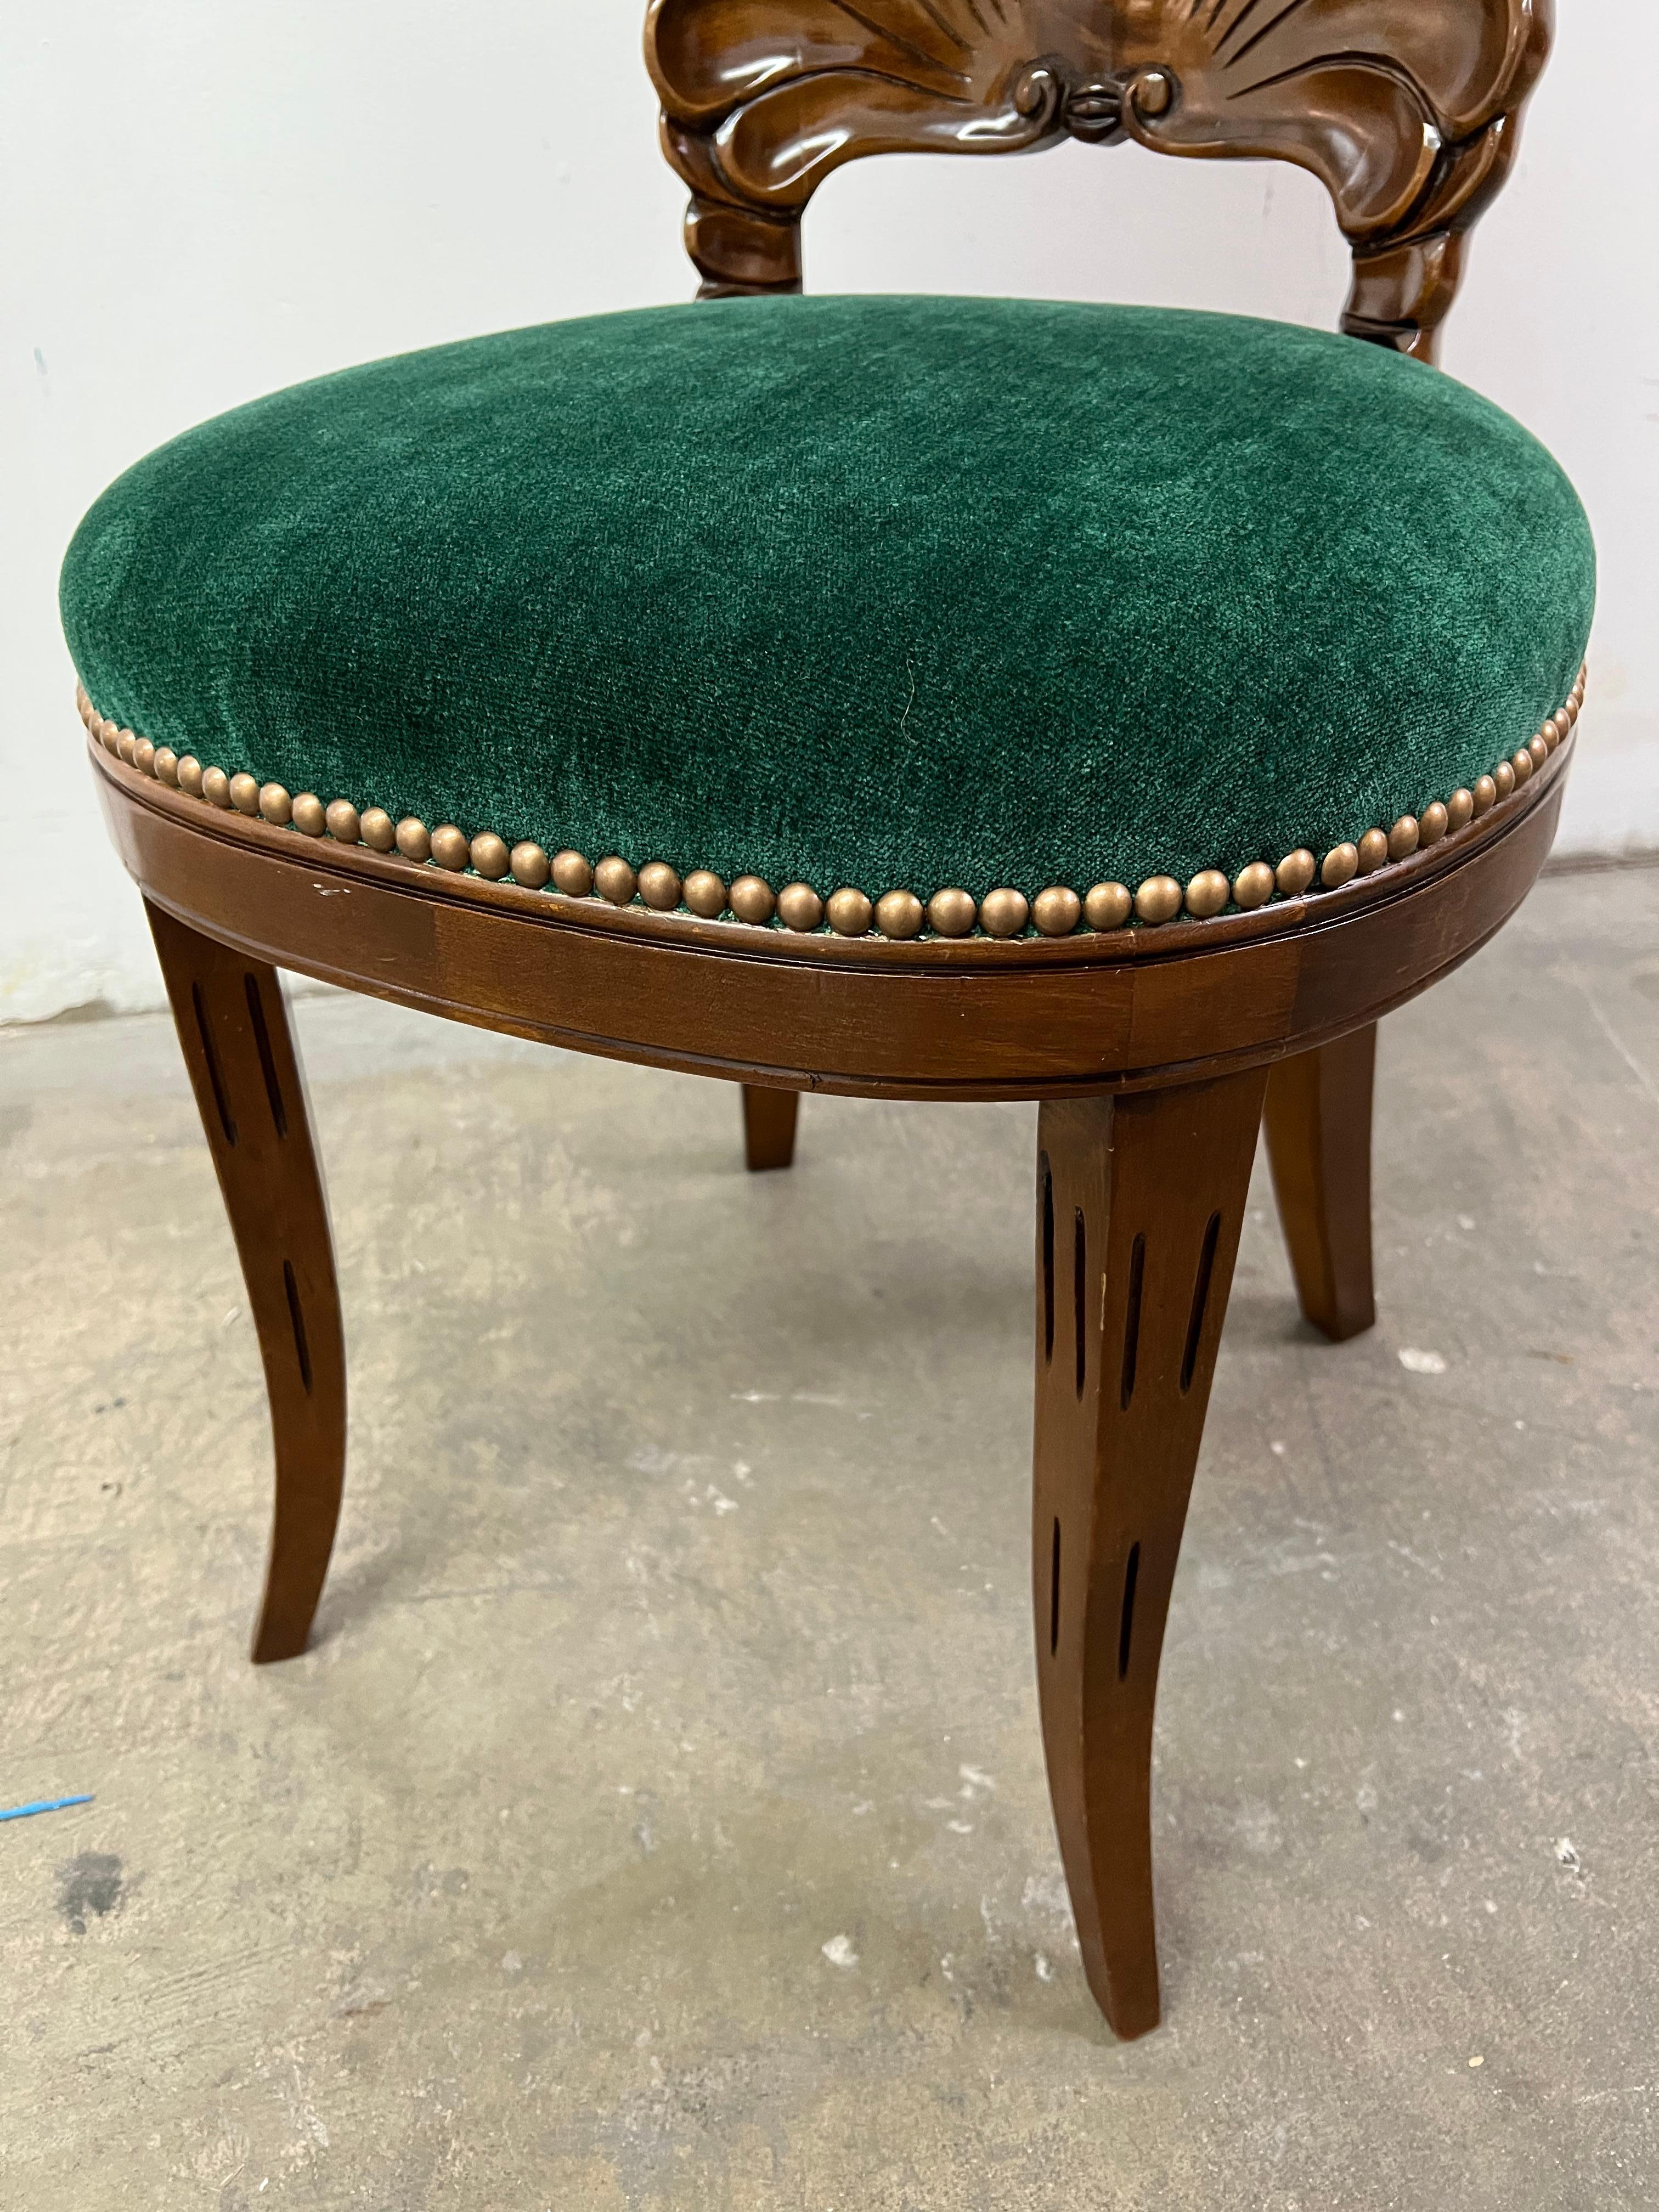 Patinated Walnut Grotto Shell Side Chair Upholstered in Green Mohair